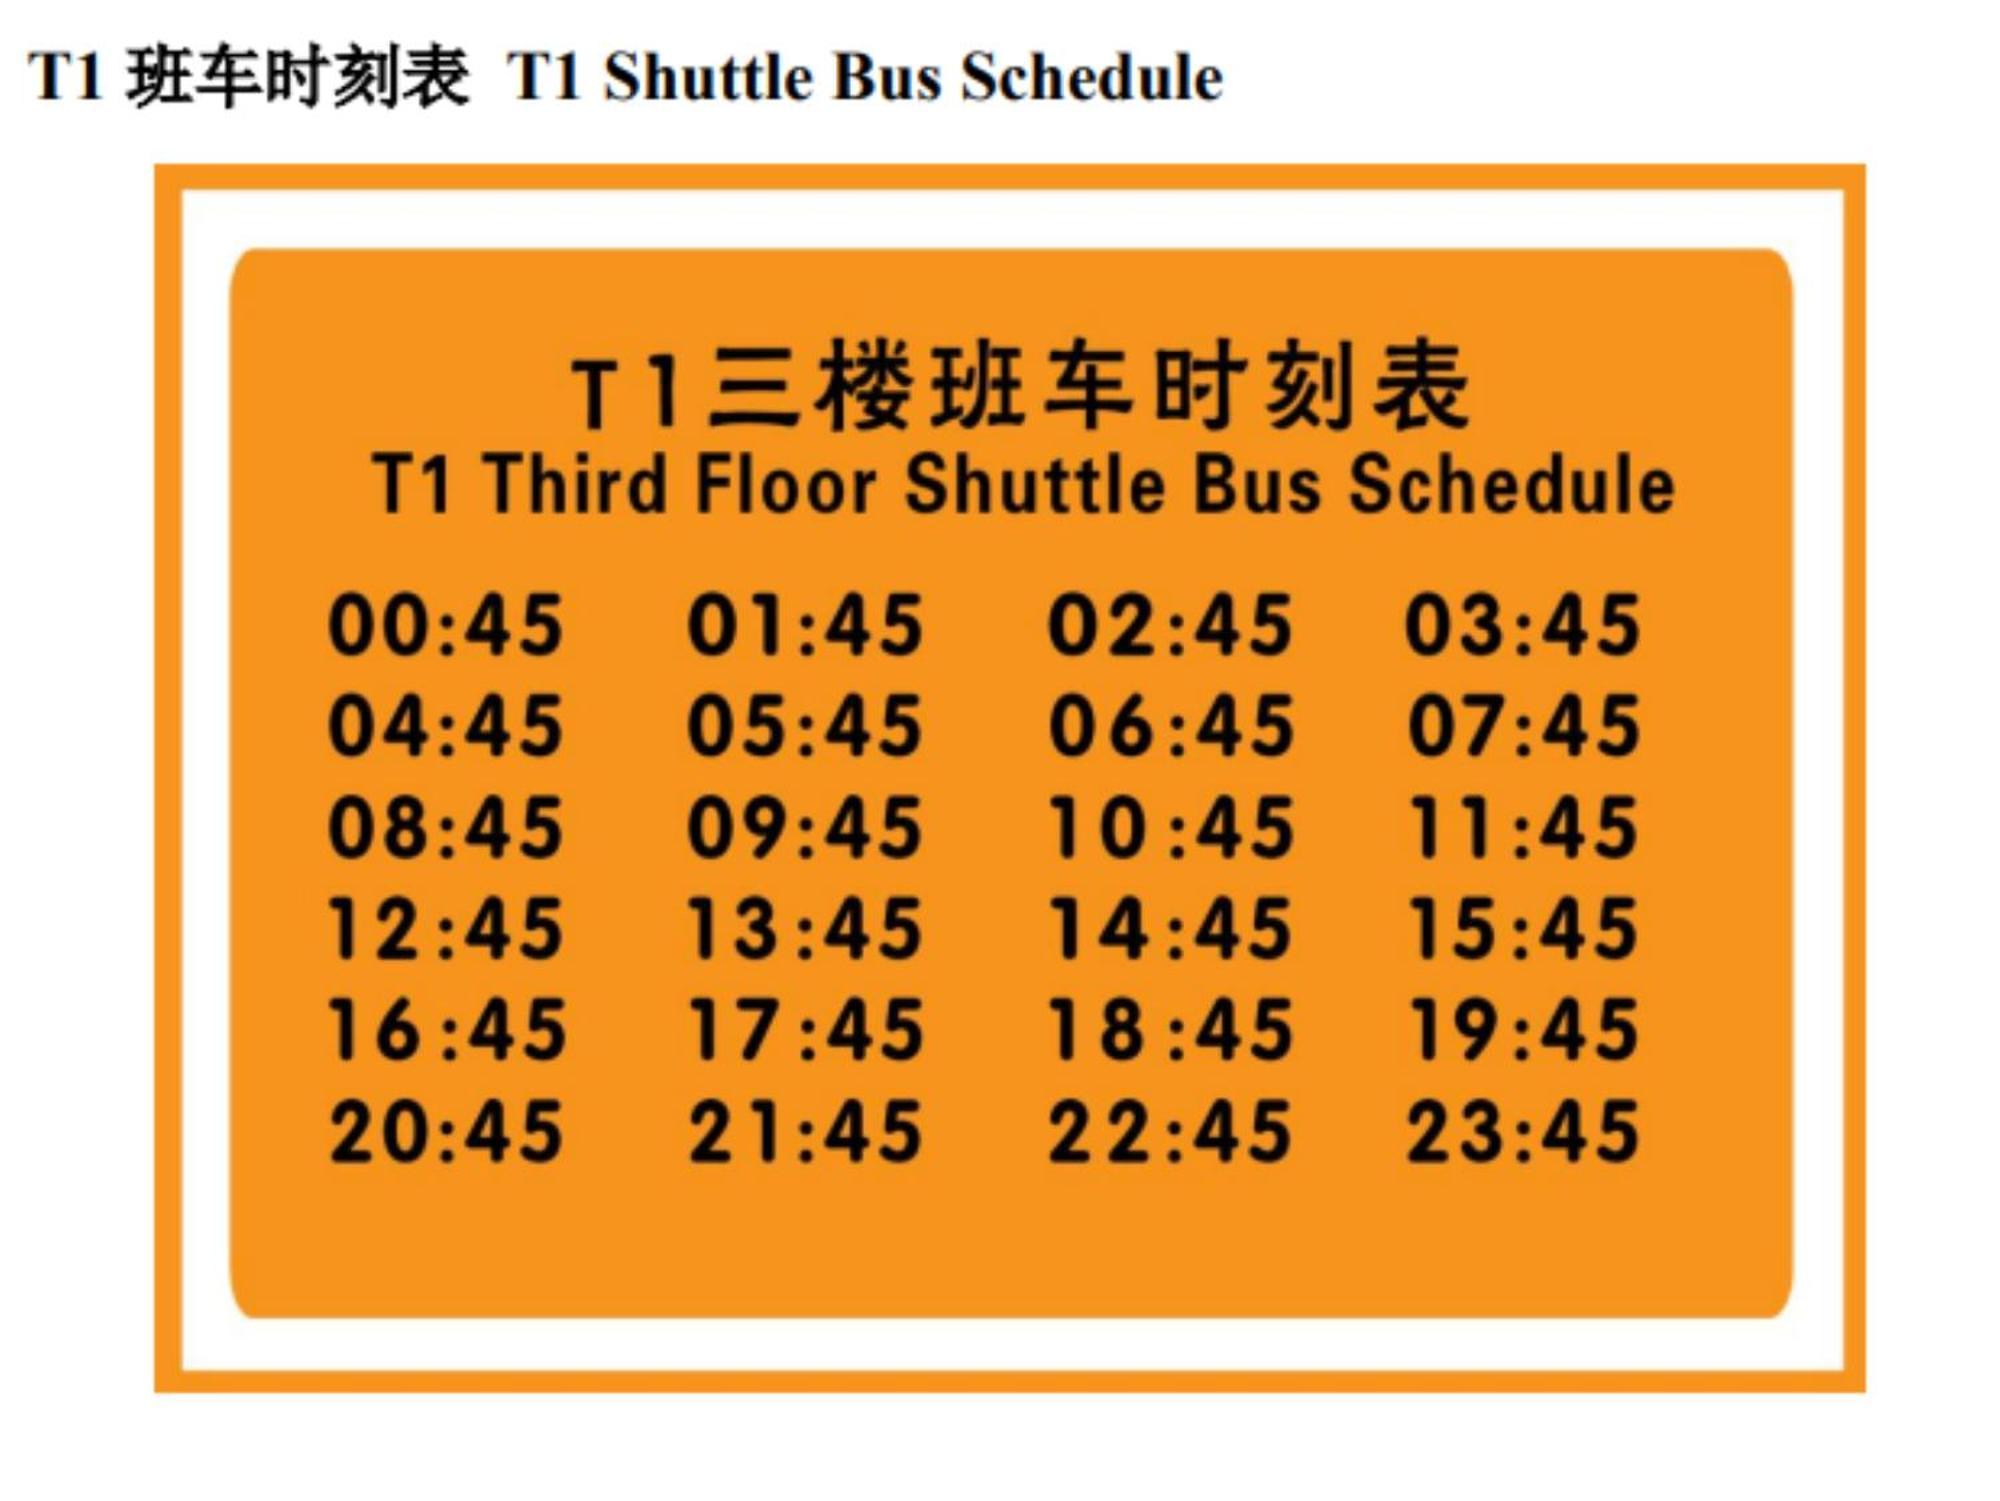 Shanghai-Deco Hotel-Free Shuttle Bus From Pudong Airport And Disneylan Zewnętrze zdjęcie